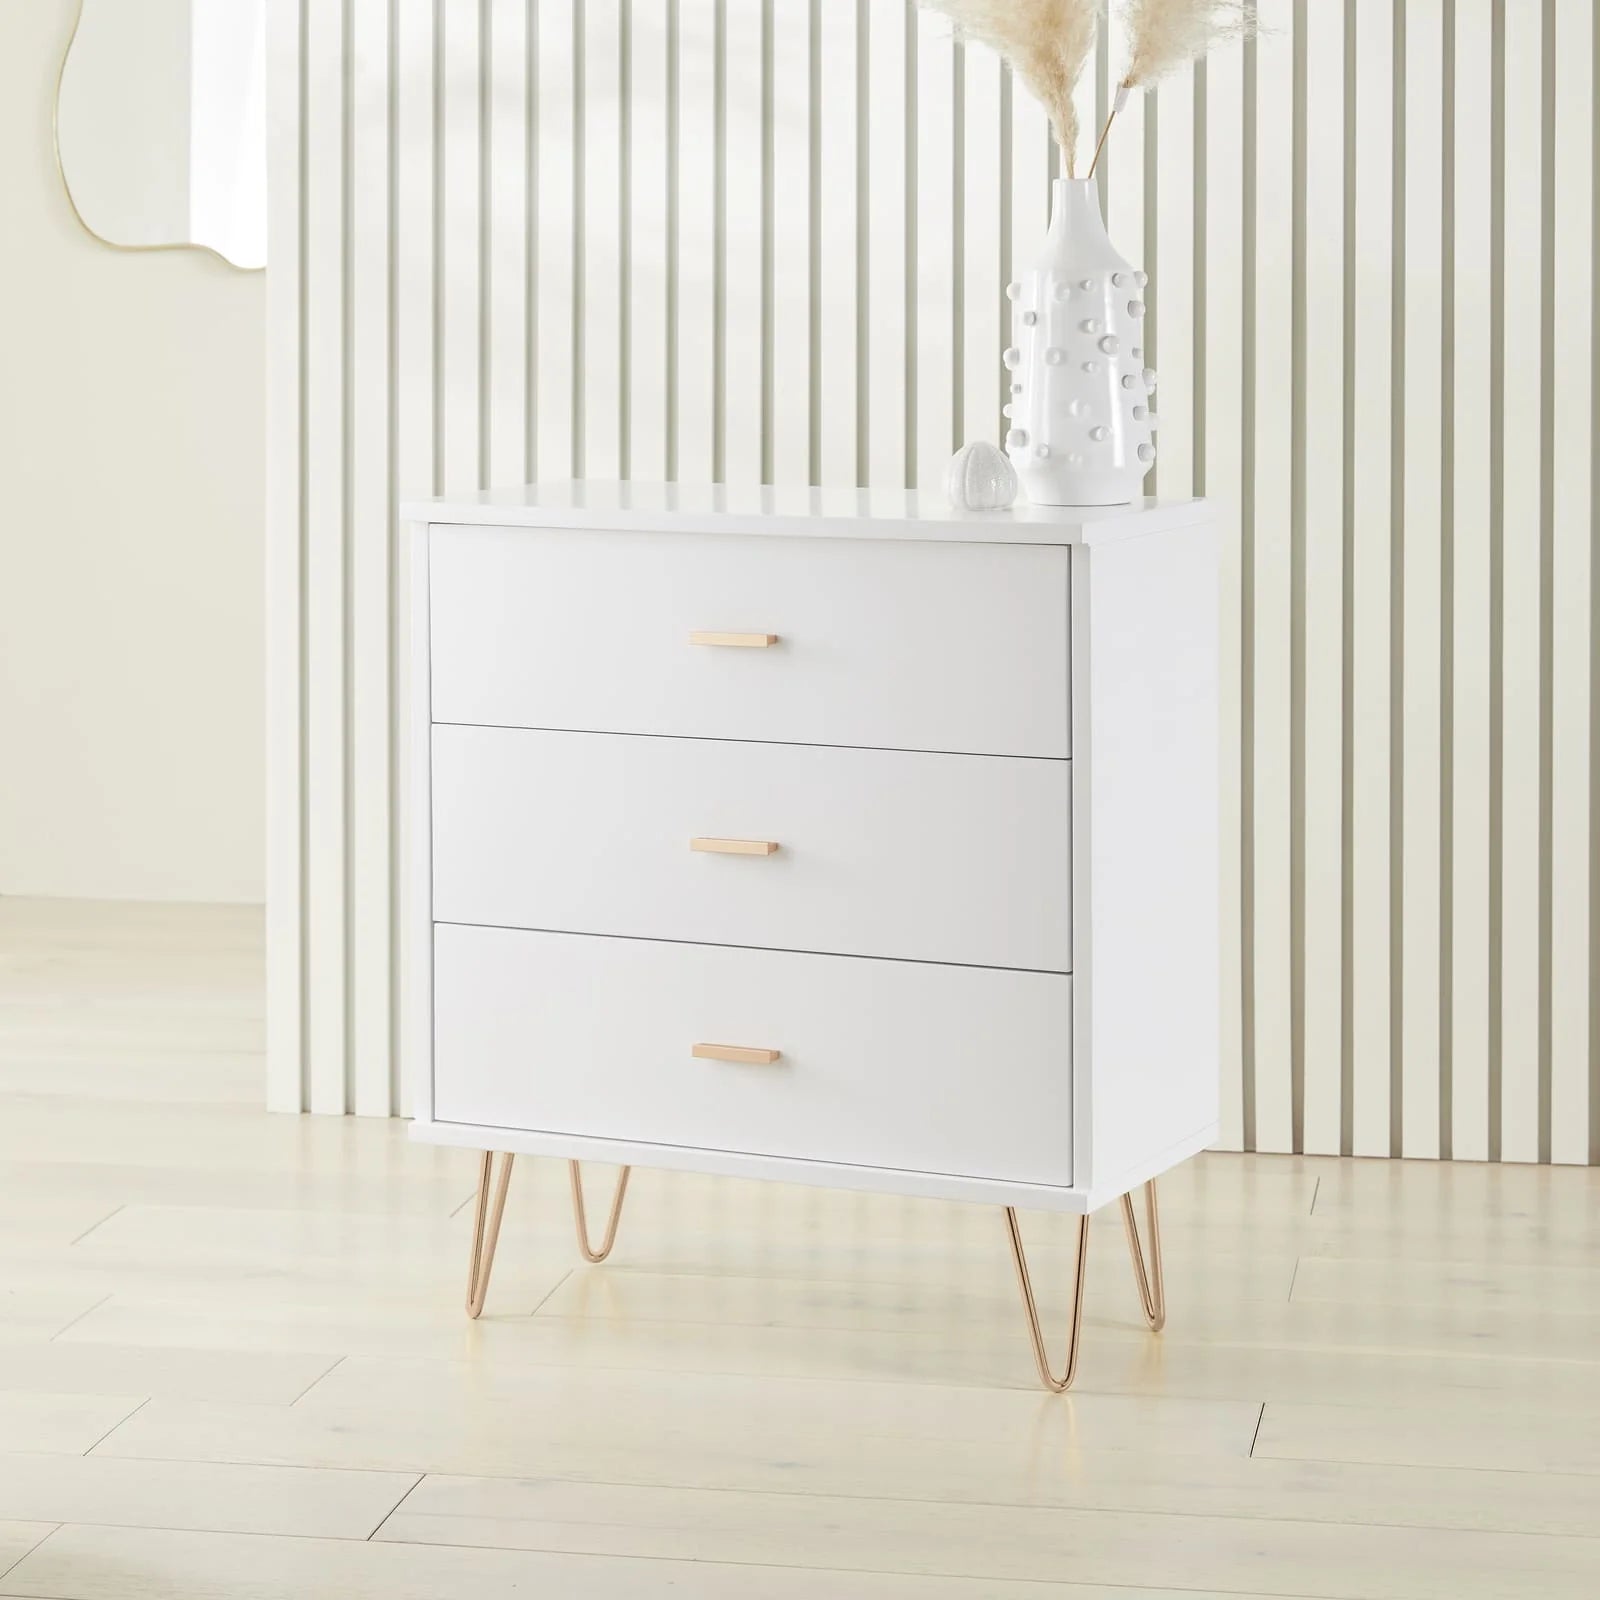 Monroe white painted solid wood chest of drawers with metal hardware | malletandplane.com